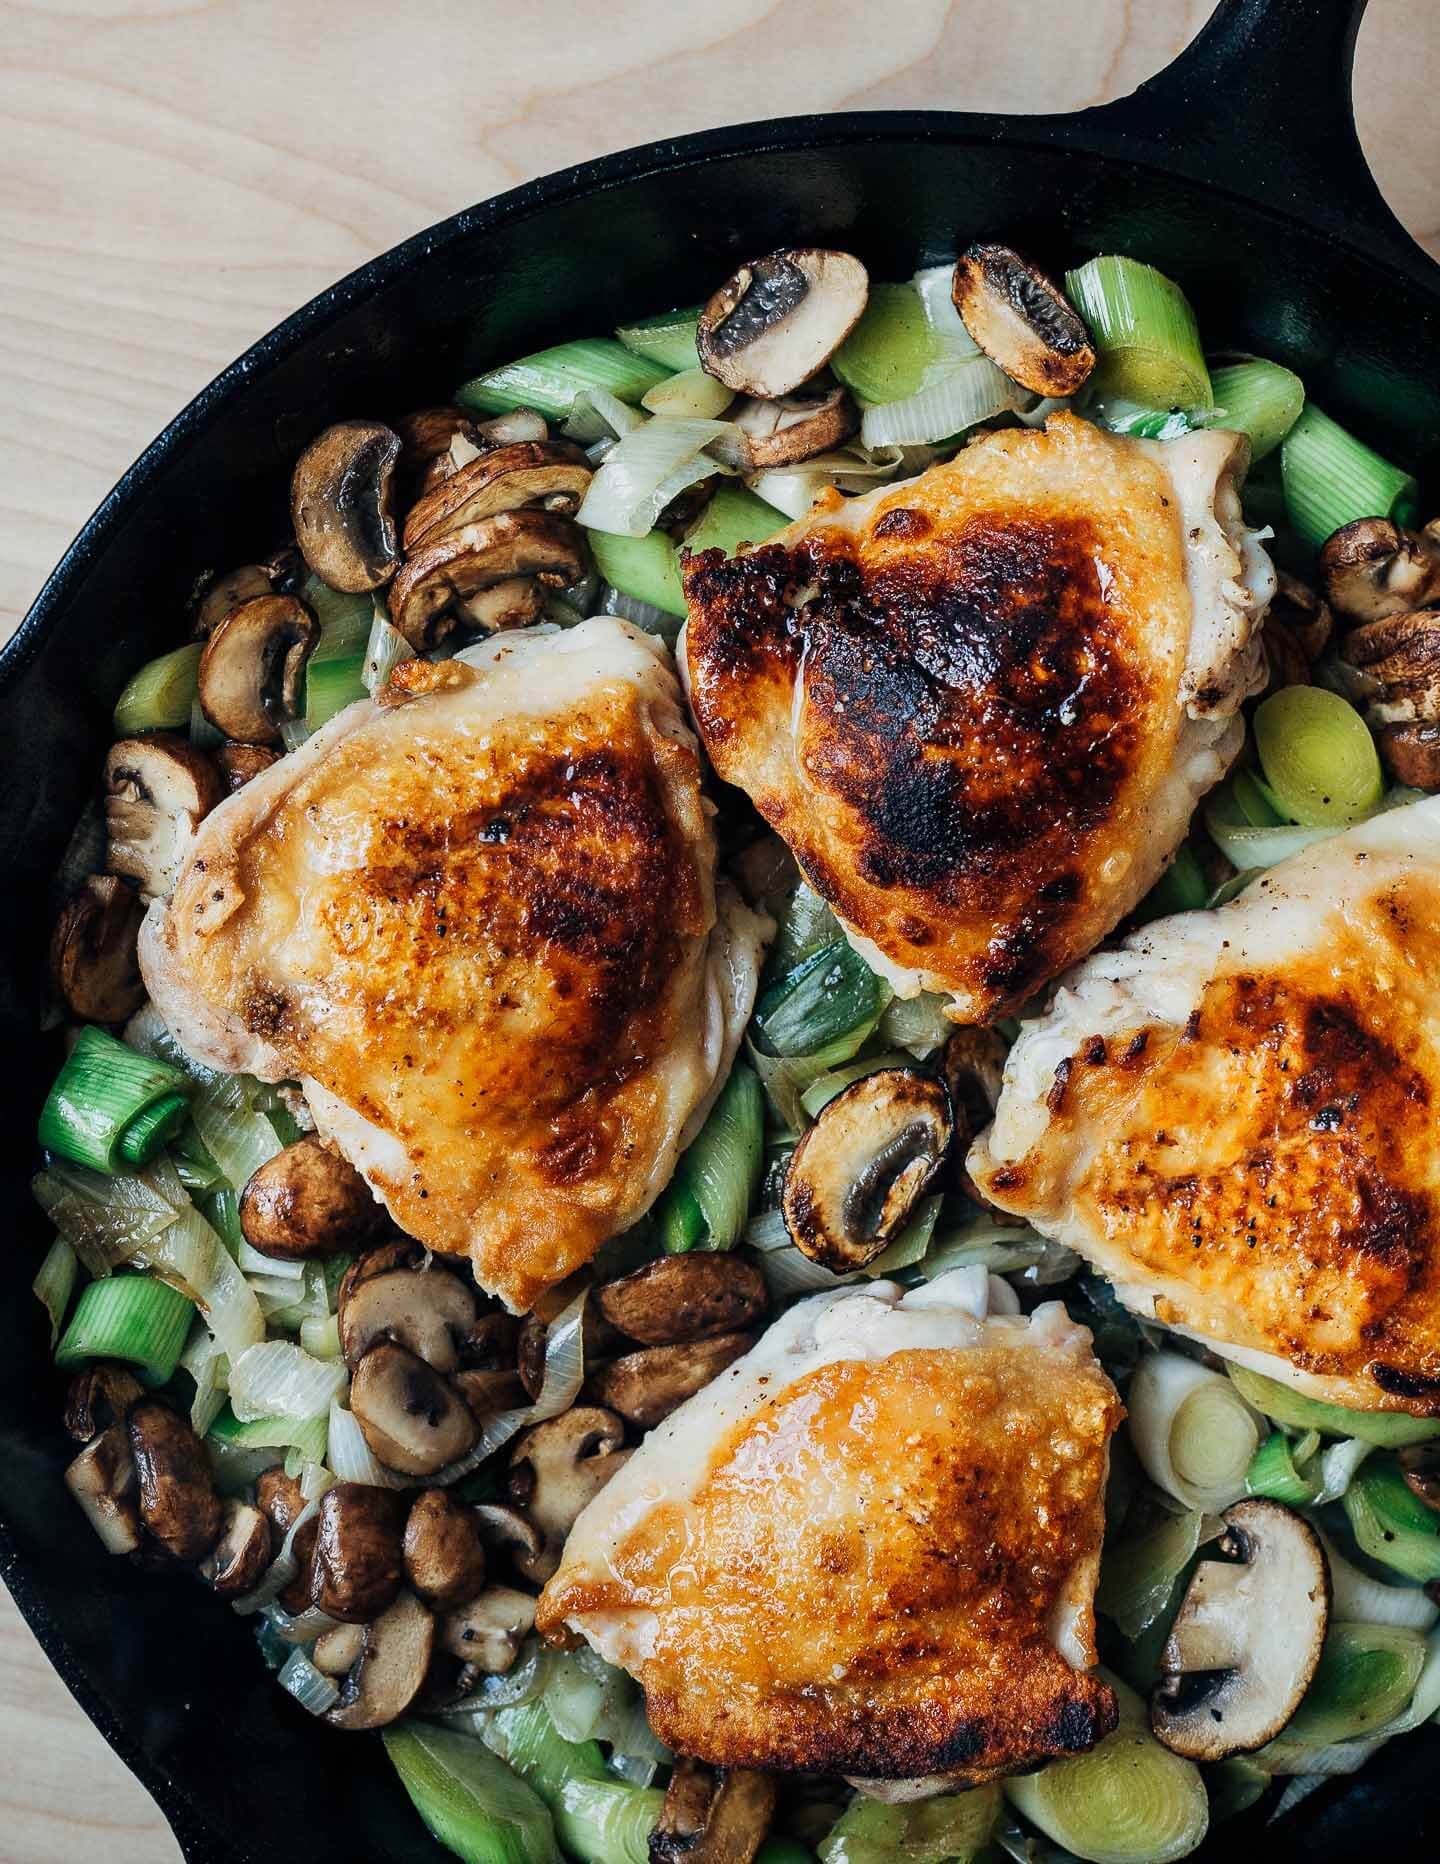 A skillet with seared chicken and vegetables, ready for the oven.